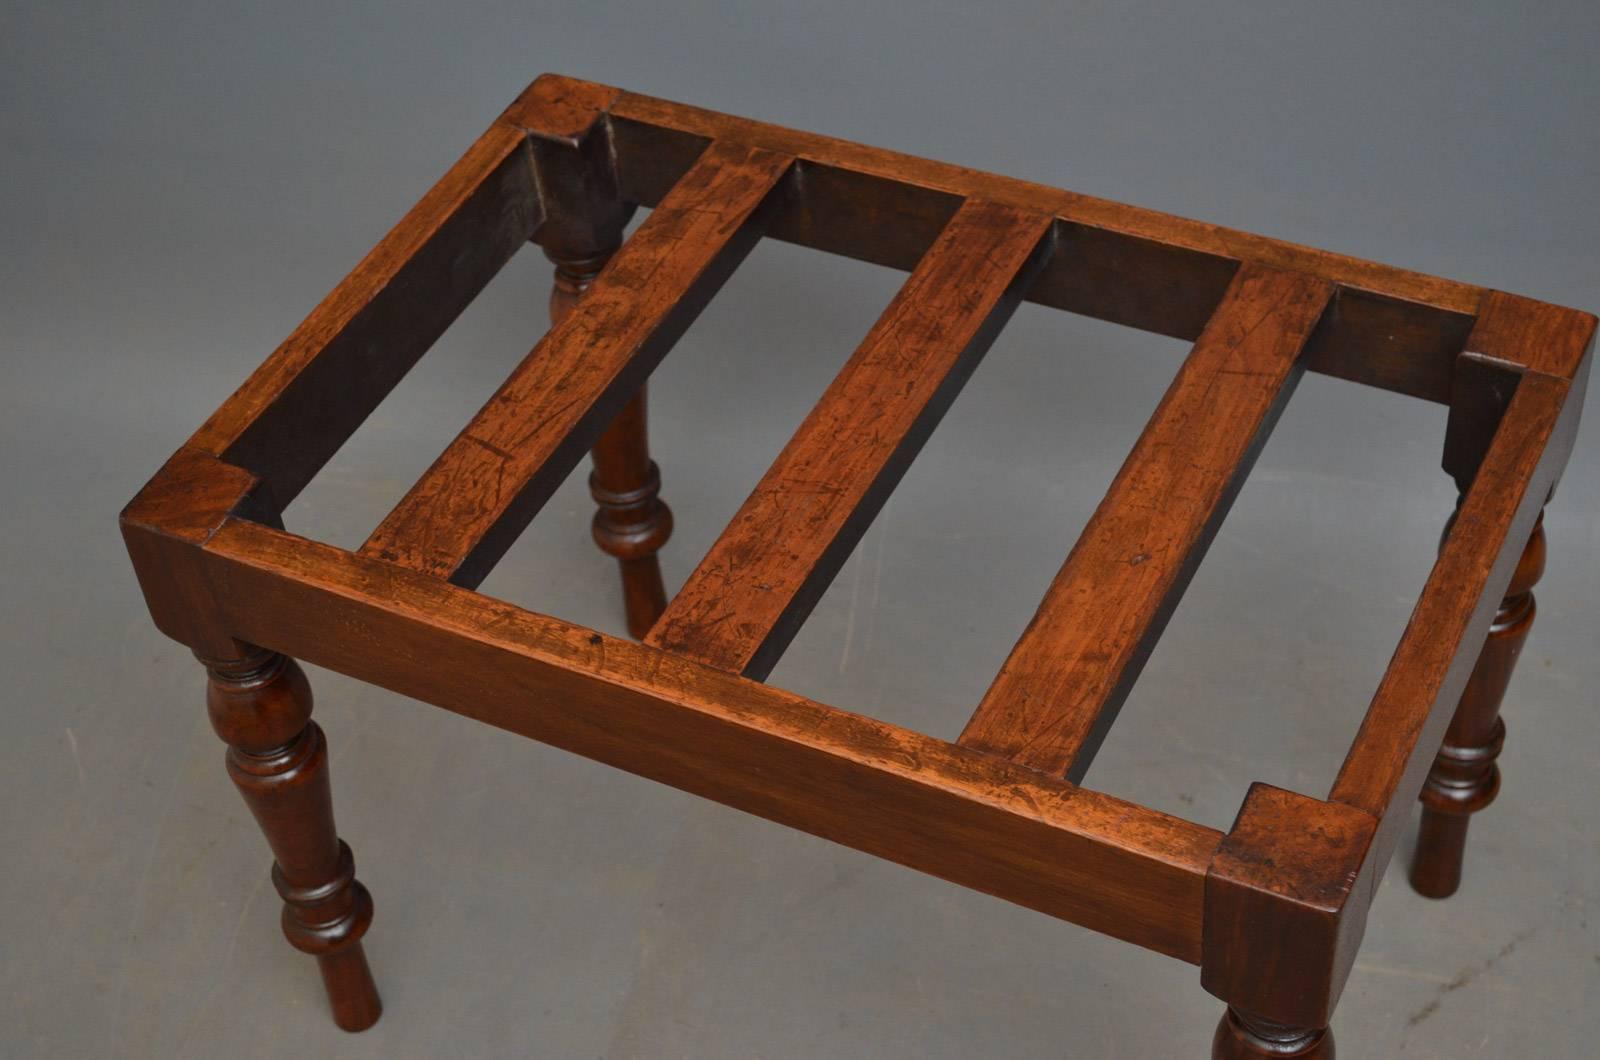 A00 Victorian, walnut luggage rack with slatted top and turned, tapered legs. This luggage stand would make a good hall bench or window seat, all in fantastic original condition throughout, ready to place at home, circa 1880
Measures: H 17